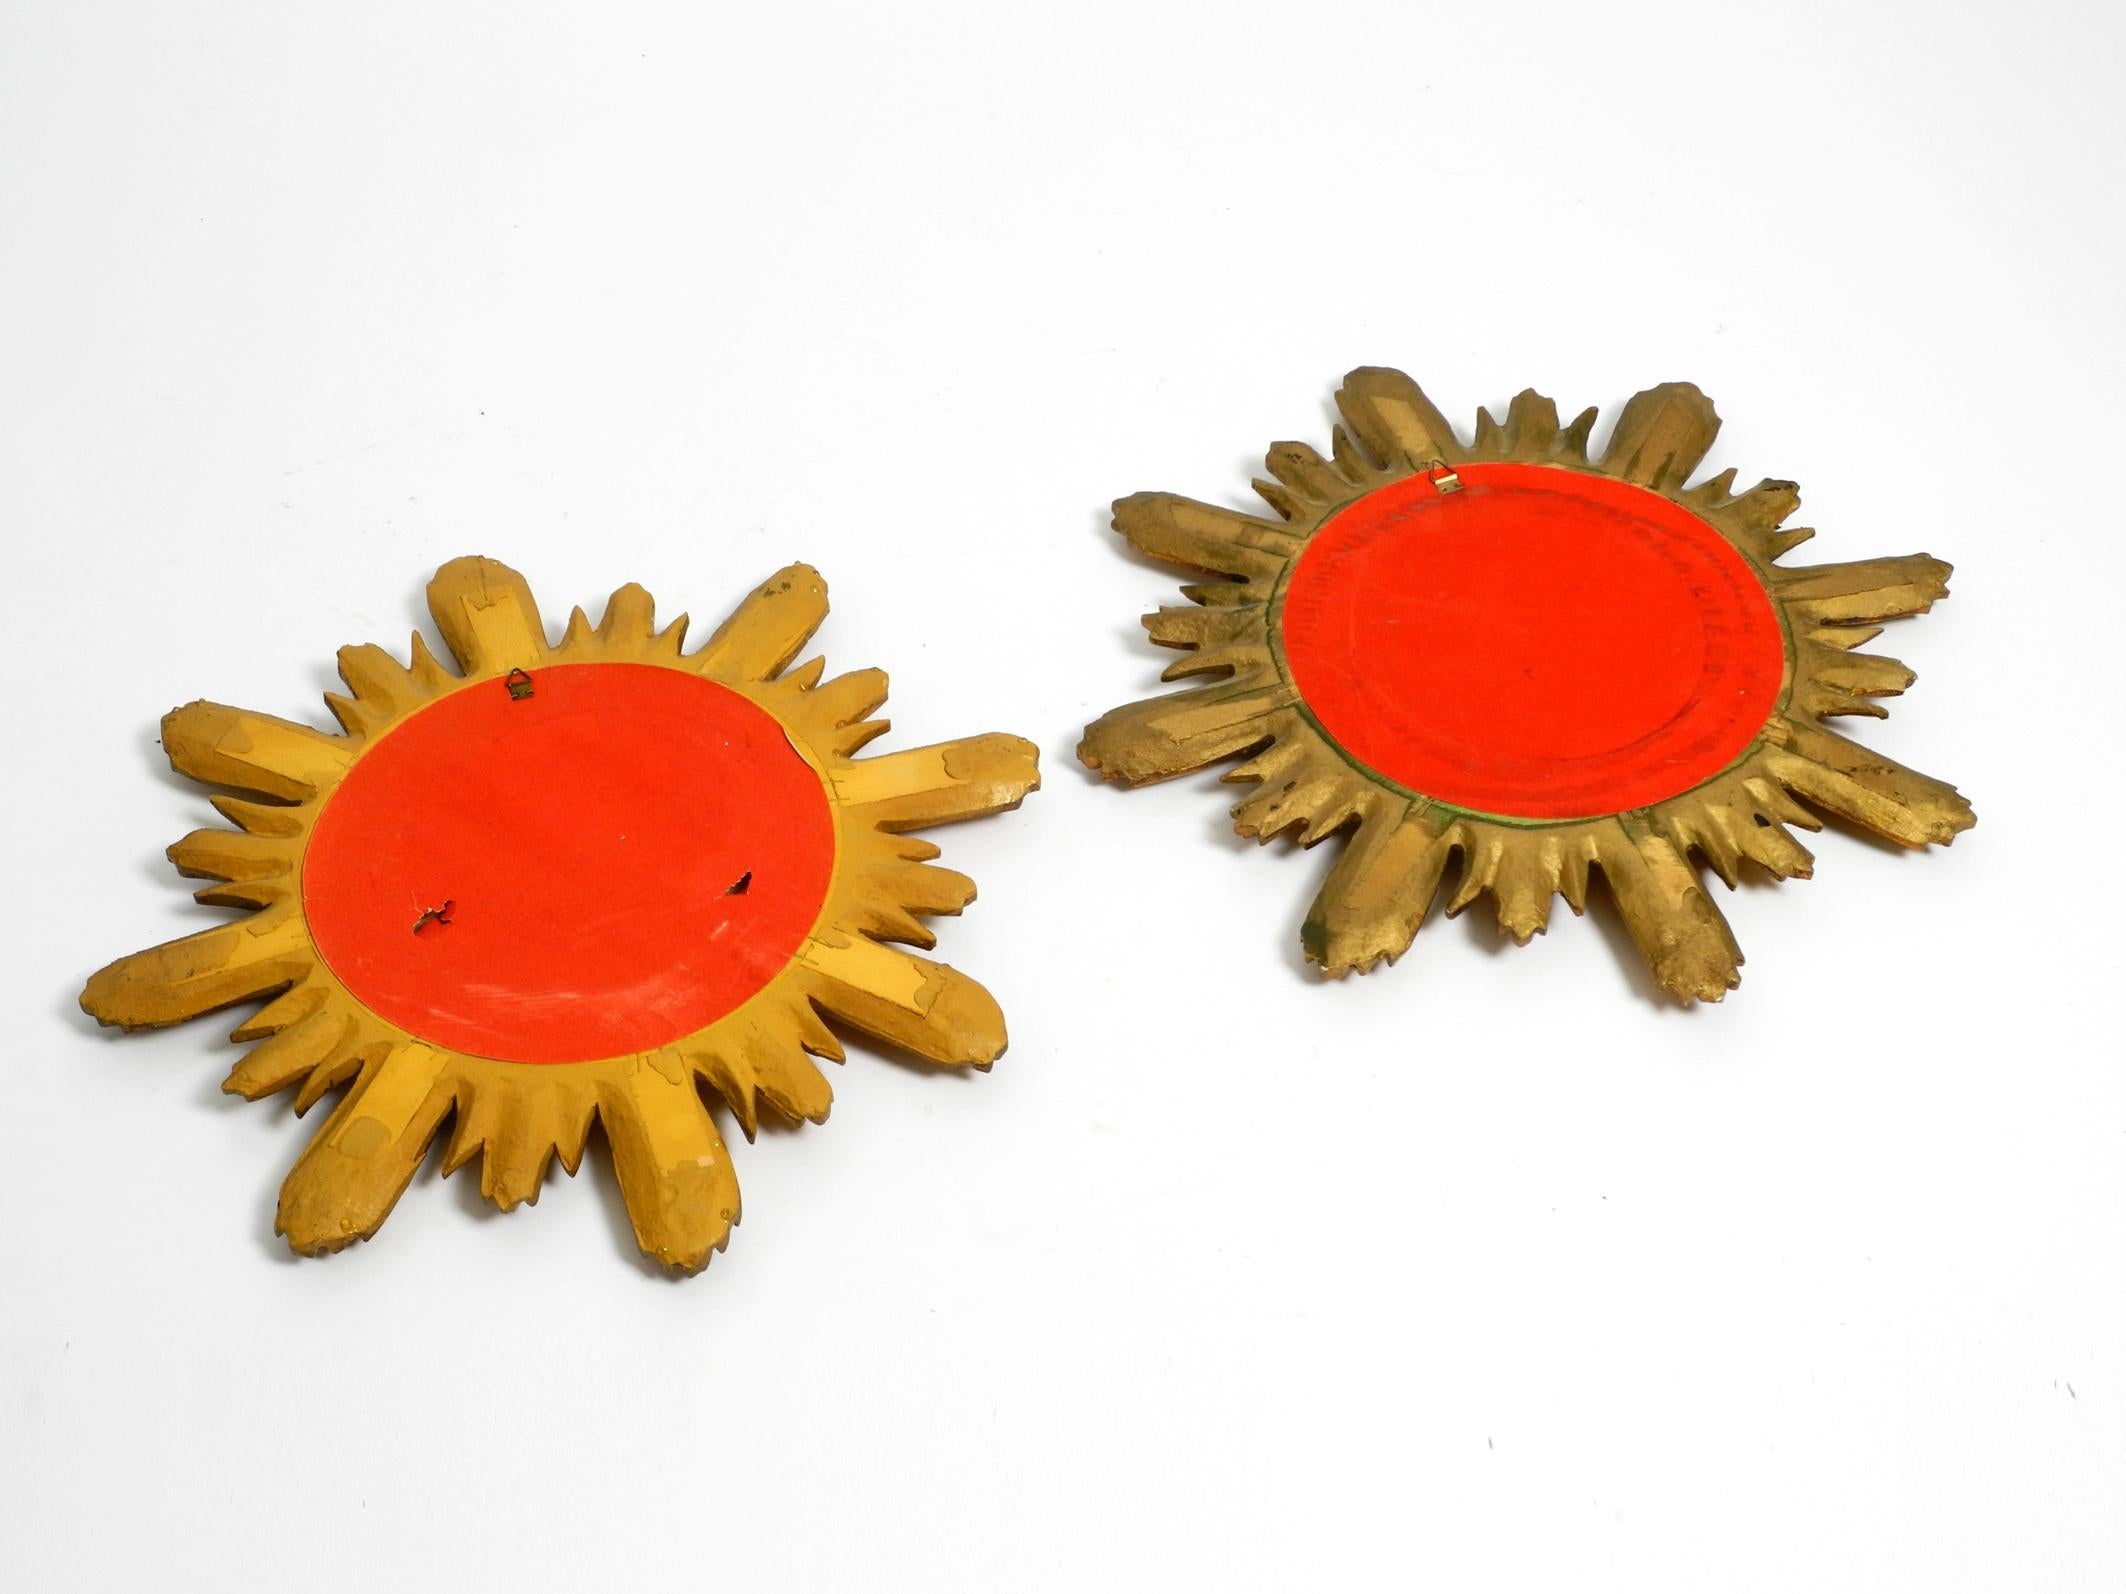 Pair of gold-plated mid-century sunburst wall mirrors made of wood and resin For Sale 4